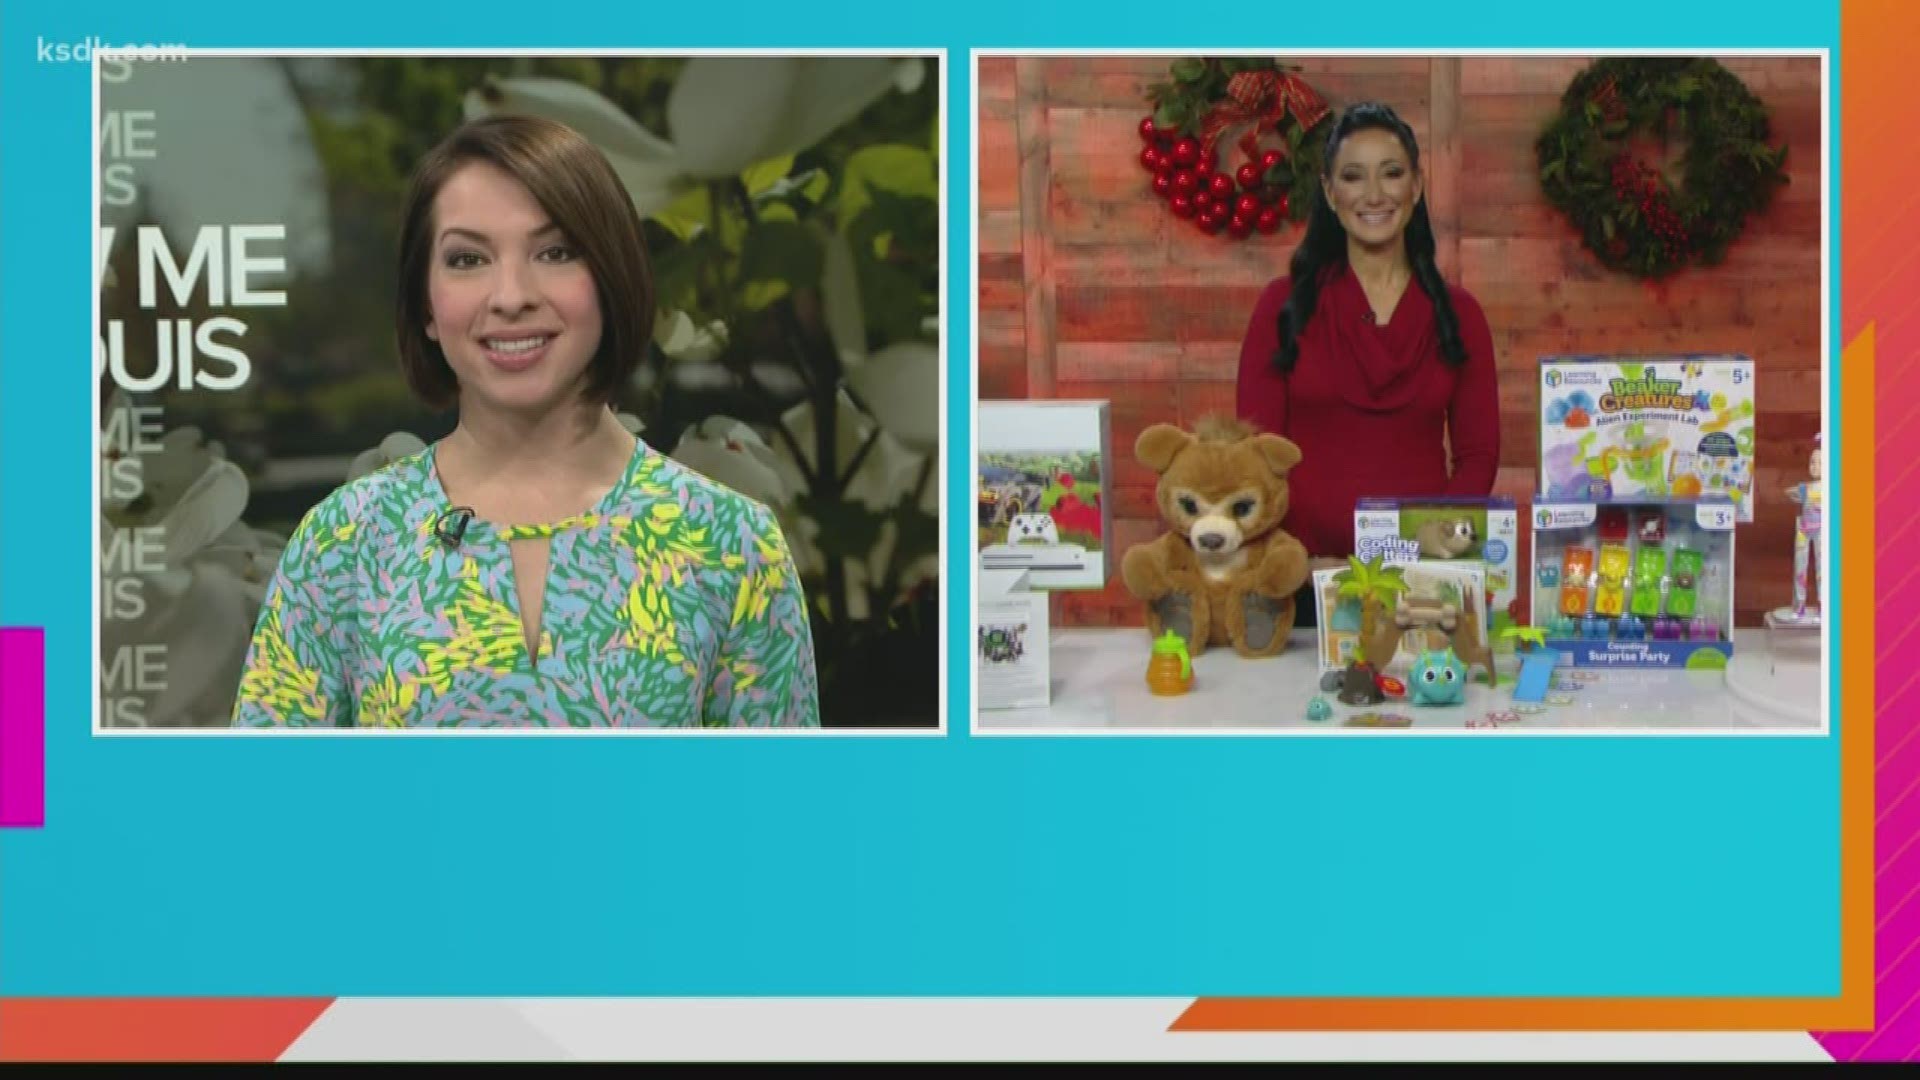 Find out what kids are asking for on their holiday lists this season.